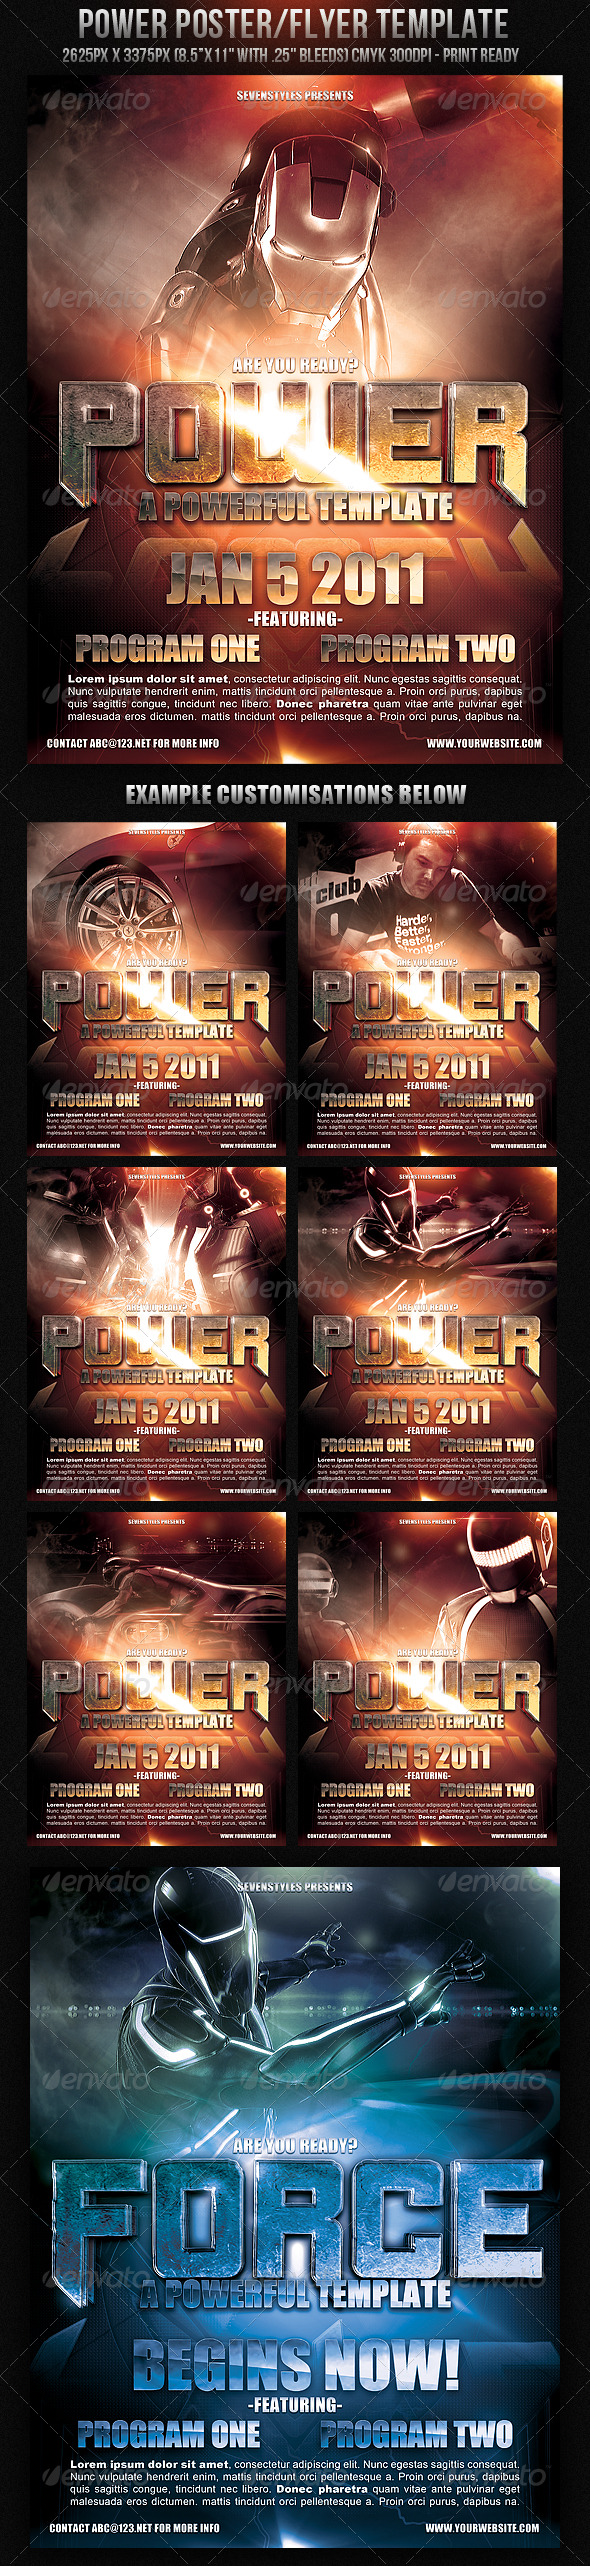 Power PosterFlyer Template - GraphicRiver Item for Sale